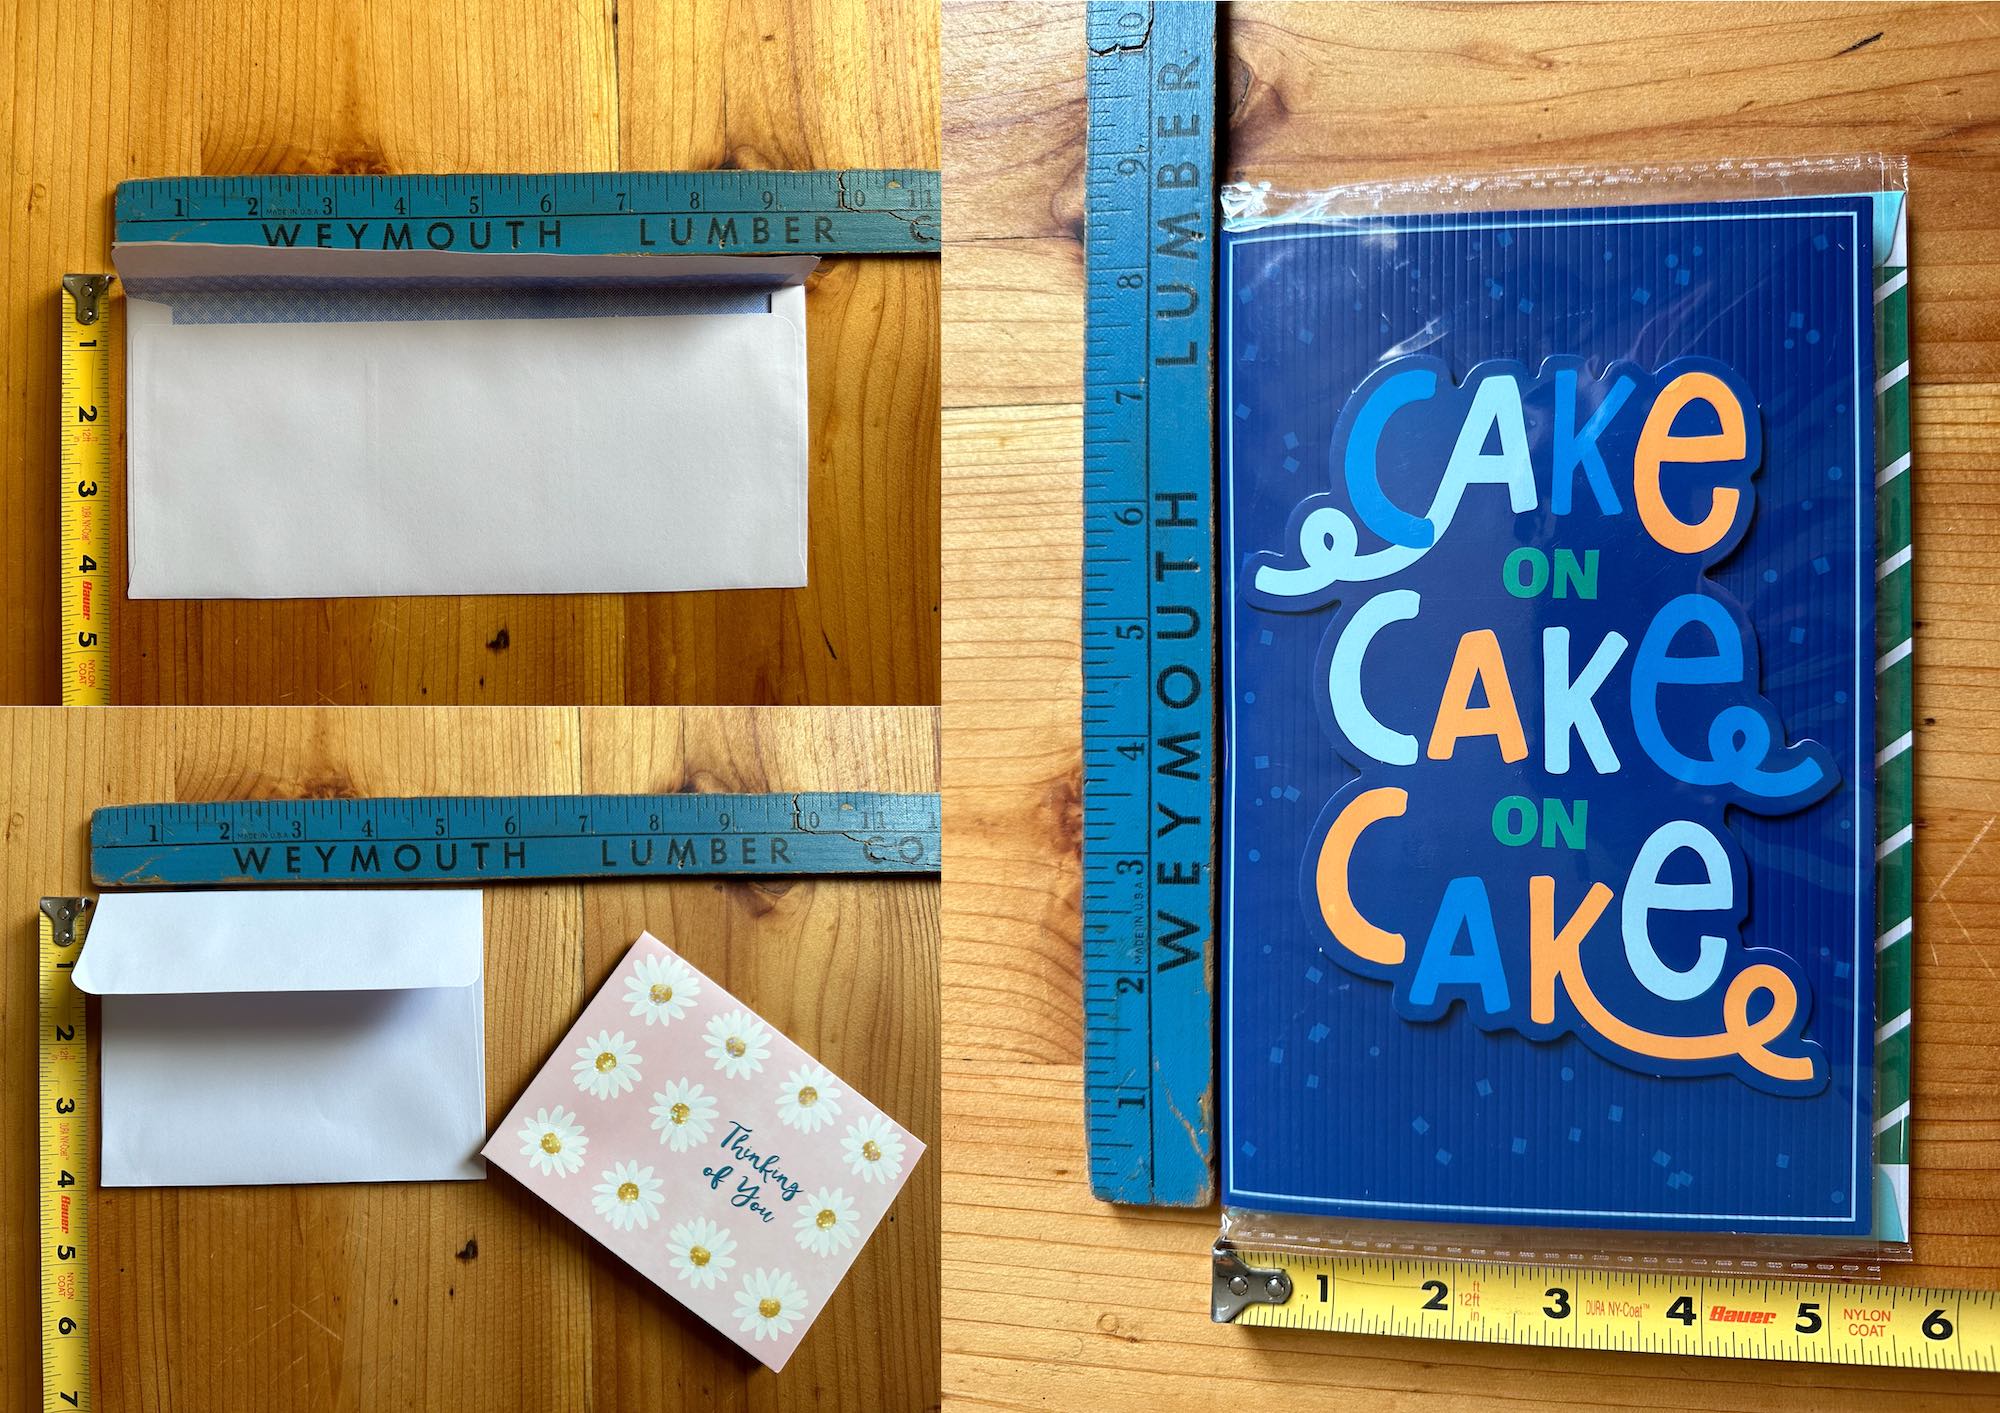 Photo showing three envelopes on a table with a ruler measuring either side. There is a measuring stick that says, 'WEYMOUTH LUMBER COMPANY'. The larger greeting card featured on the right says CAKE ON CAKE ON CAKE.